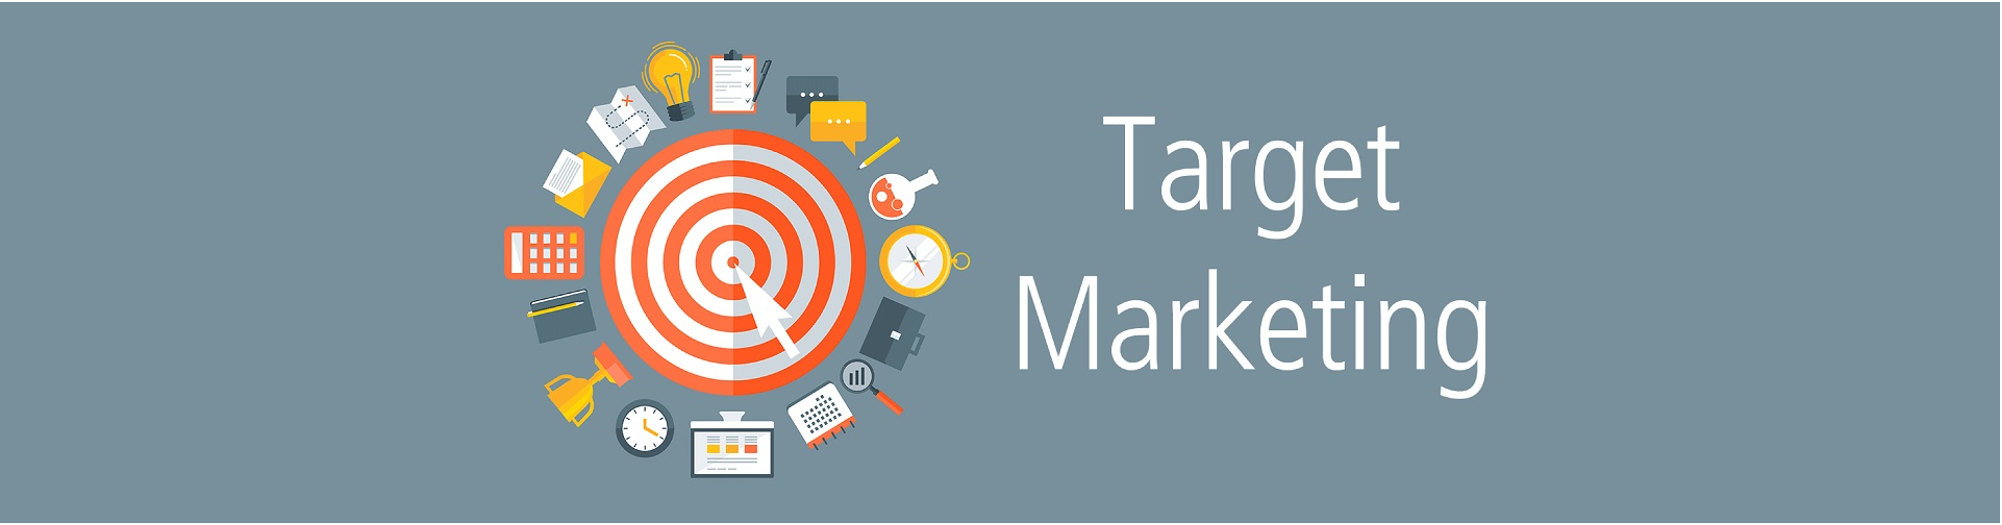 What are benefits of targeted marketing